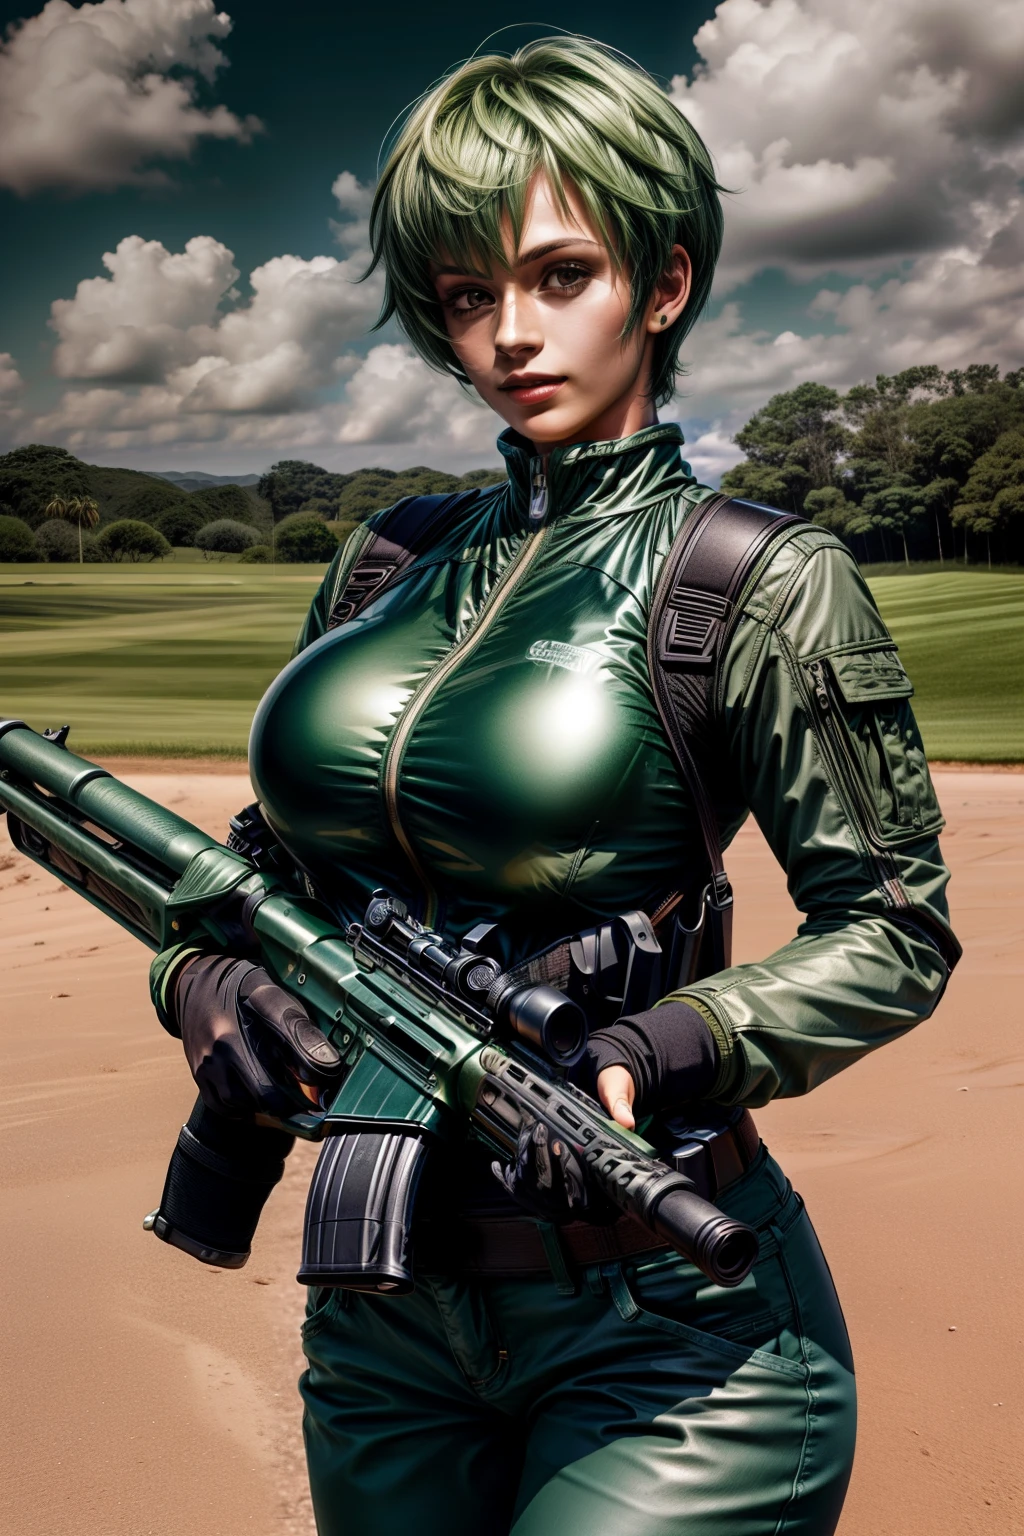 Frederica Greenhill, 25, short cut, green hair, shoots automatic weapons at a driving range, wears spacesuits with pants , Giga_Busty